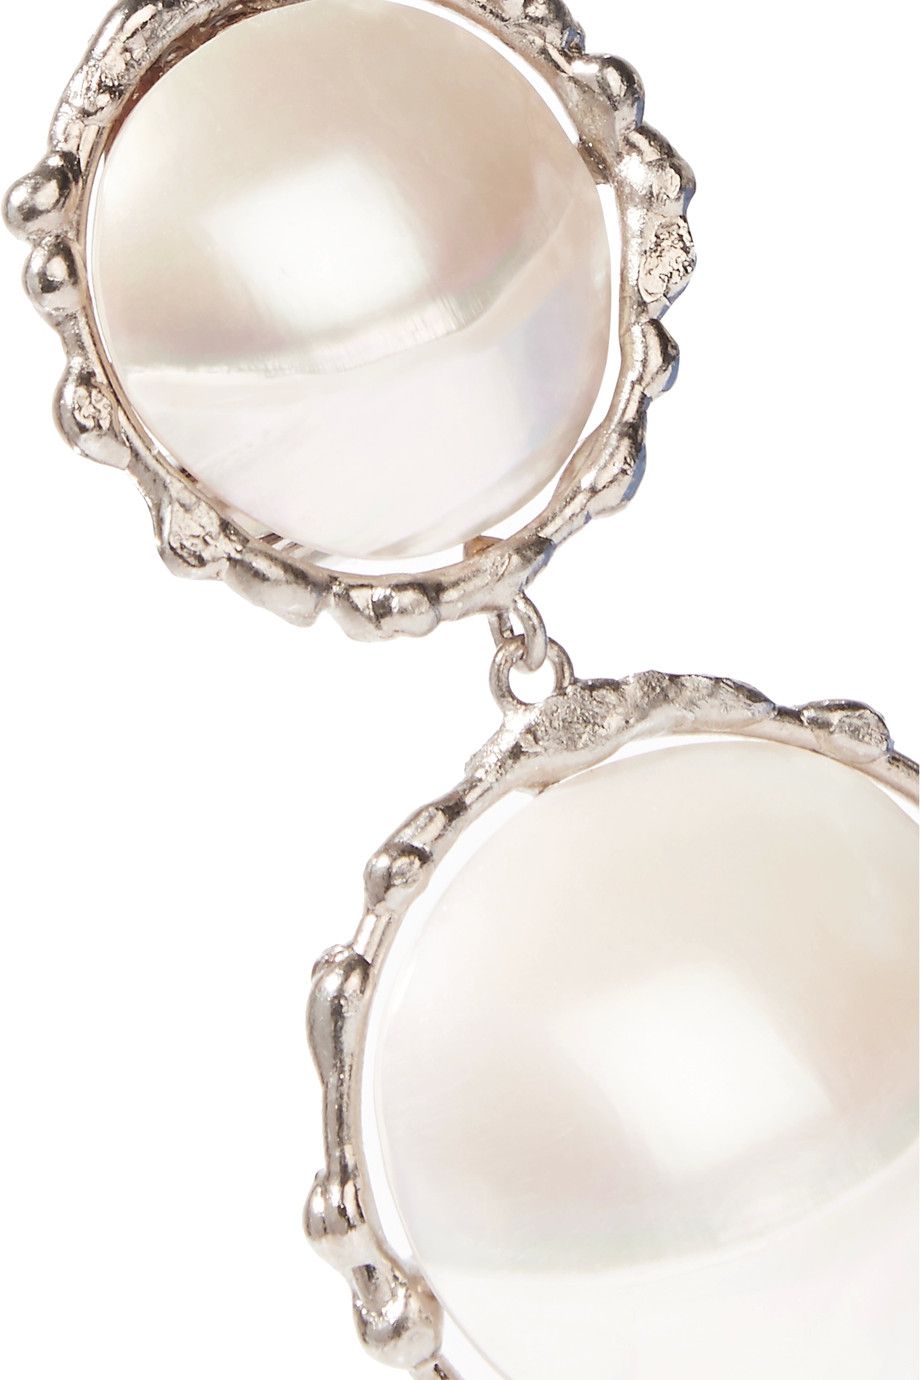 A close up of large pearl earrings